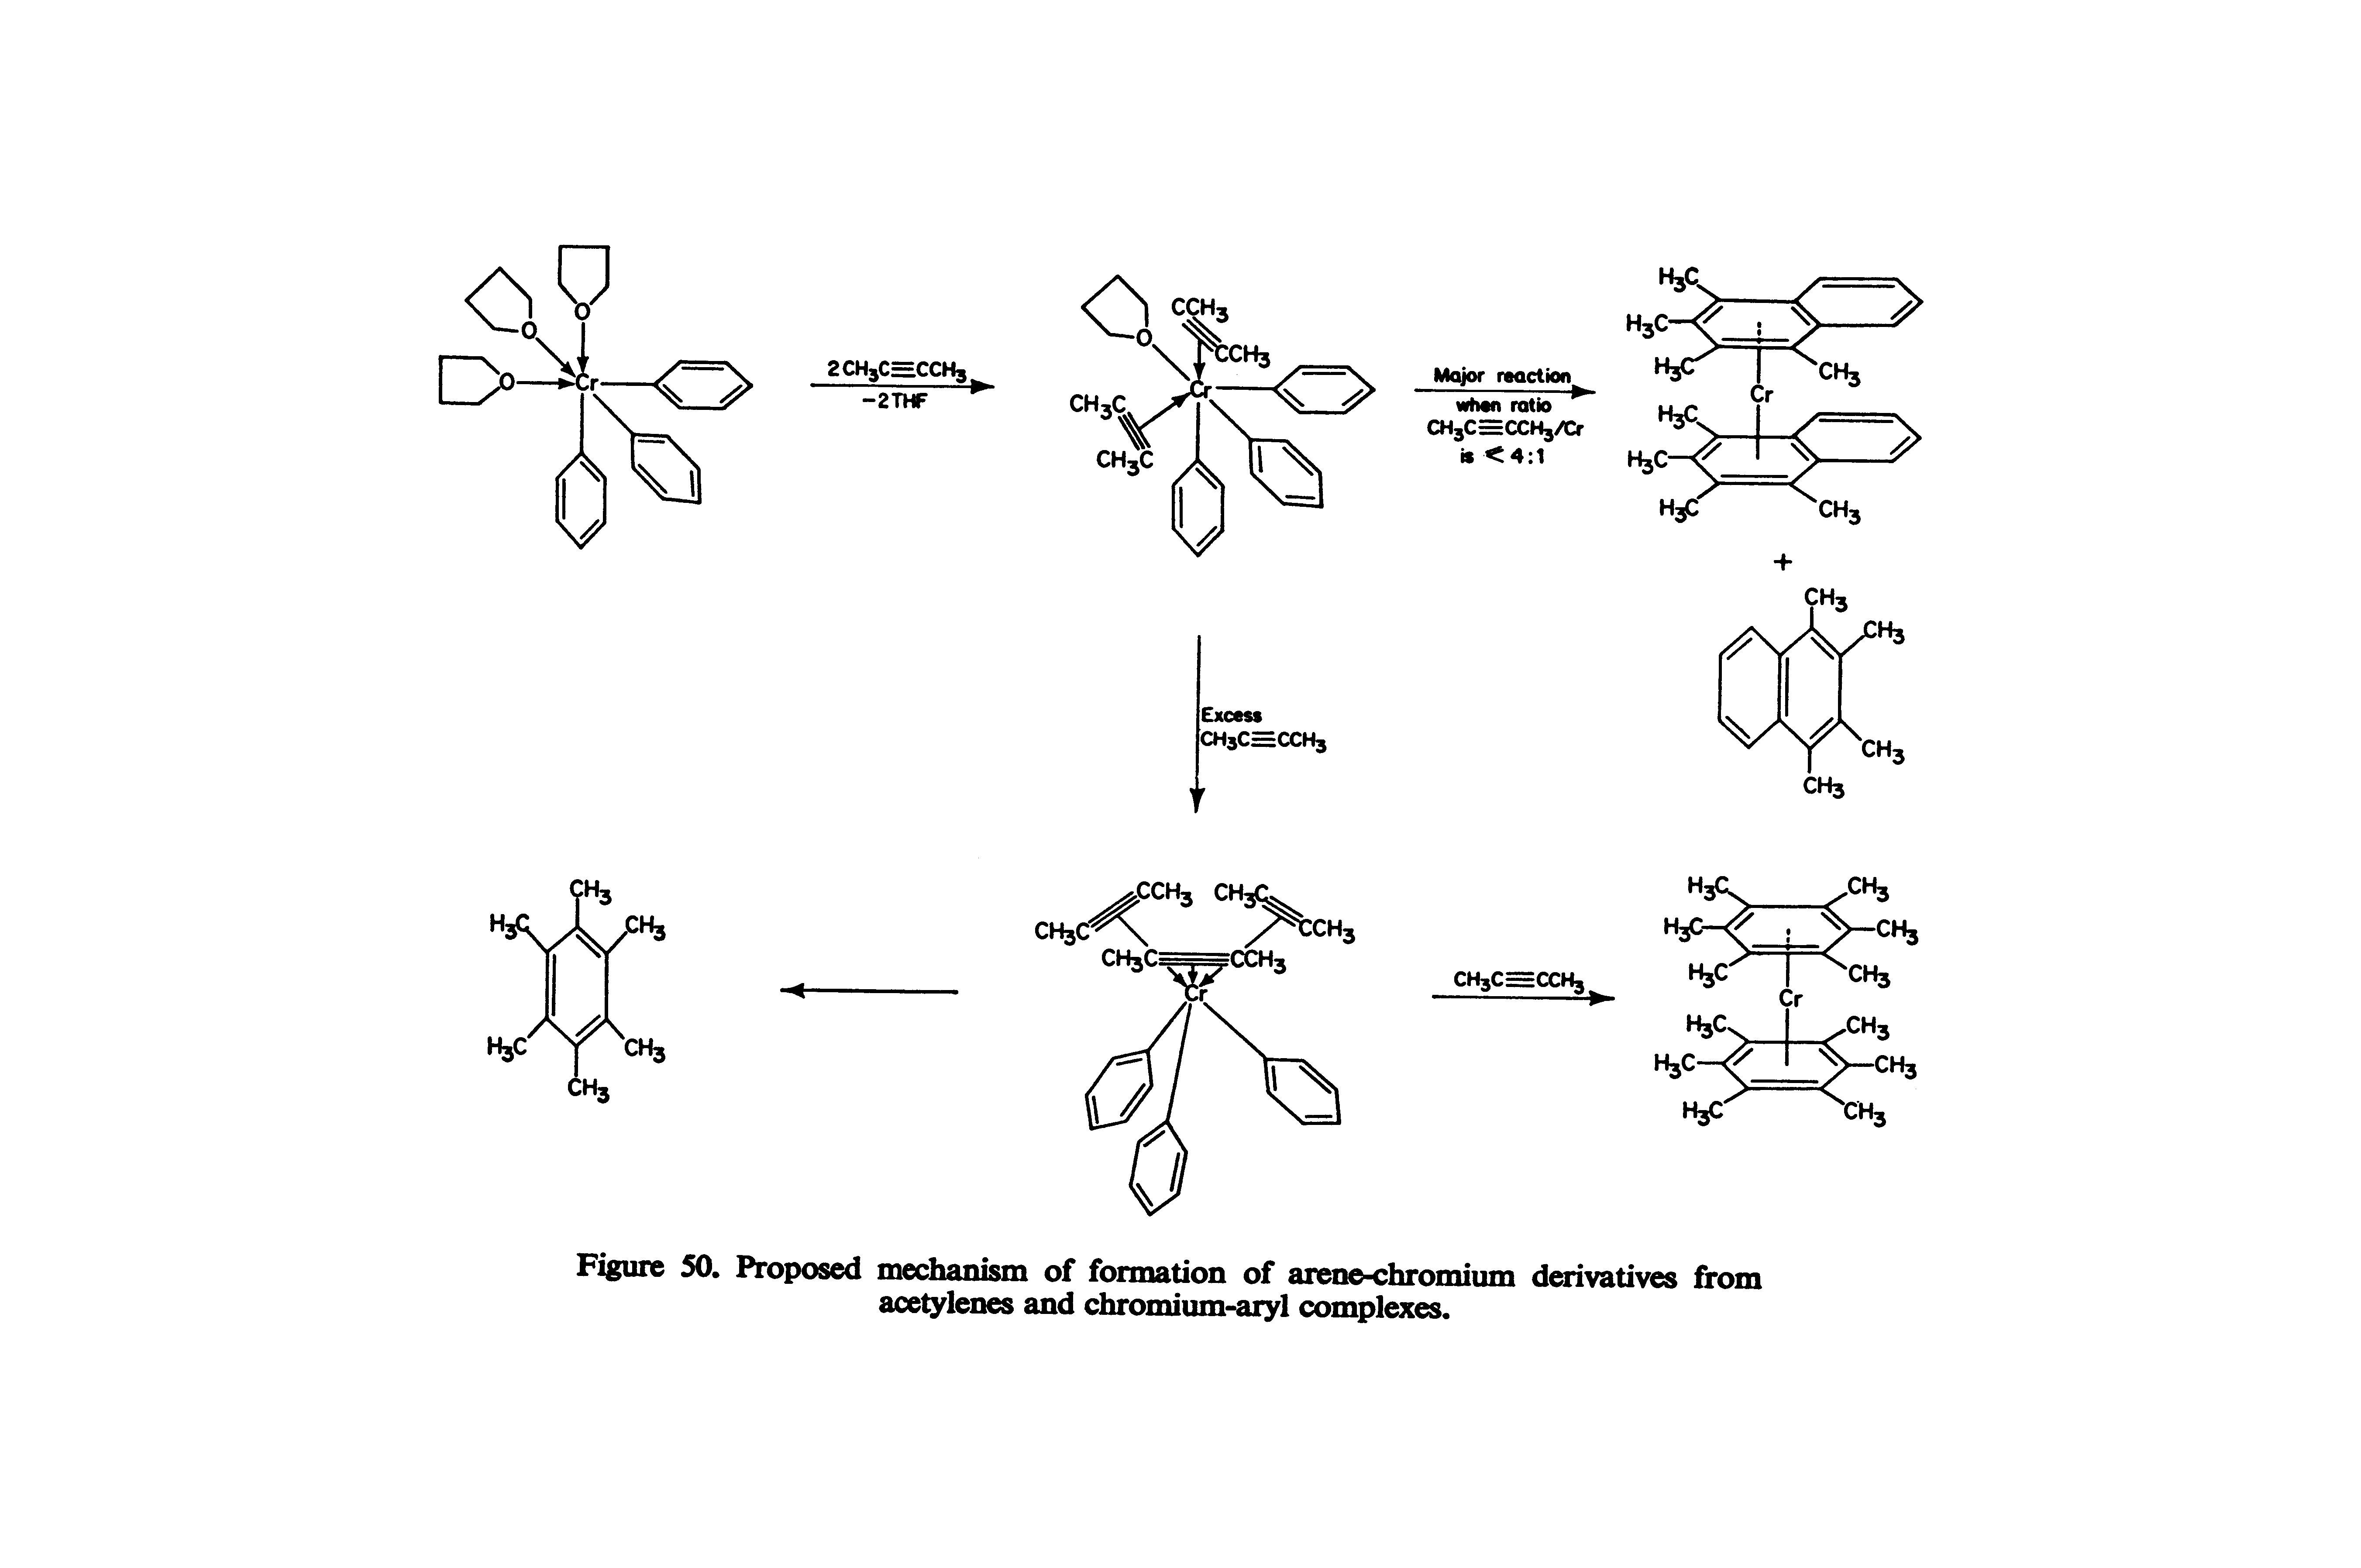 Figure 50. Proposed mechanism of formation of arene-chromium derivatives from acetylenes and chromium-aryl complexes.